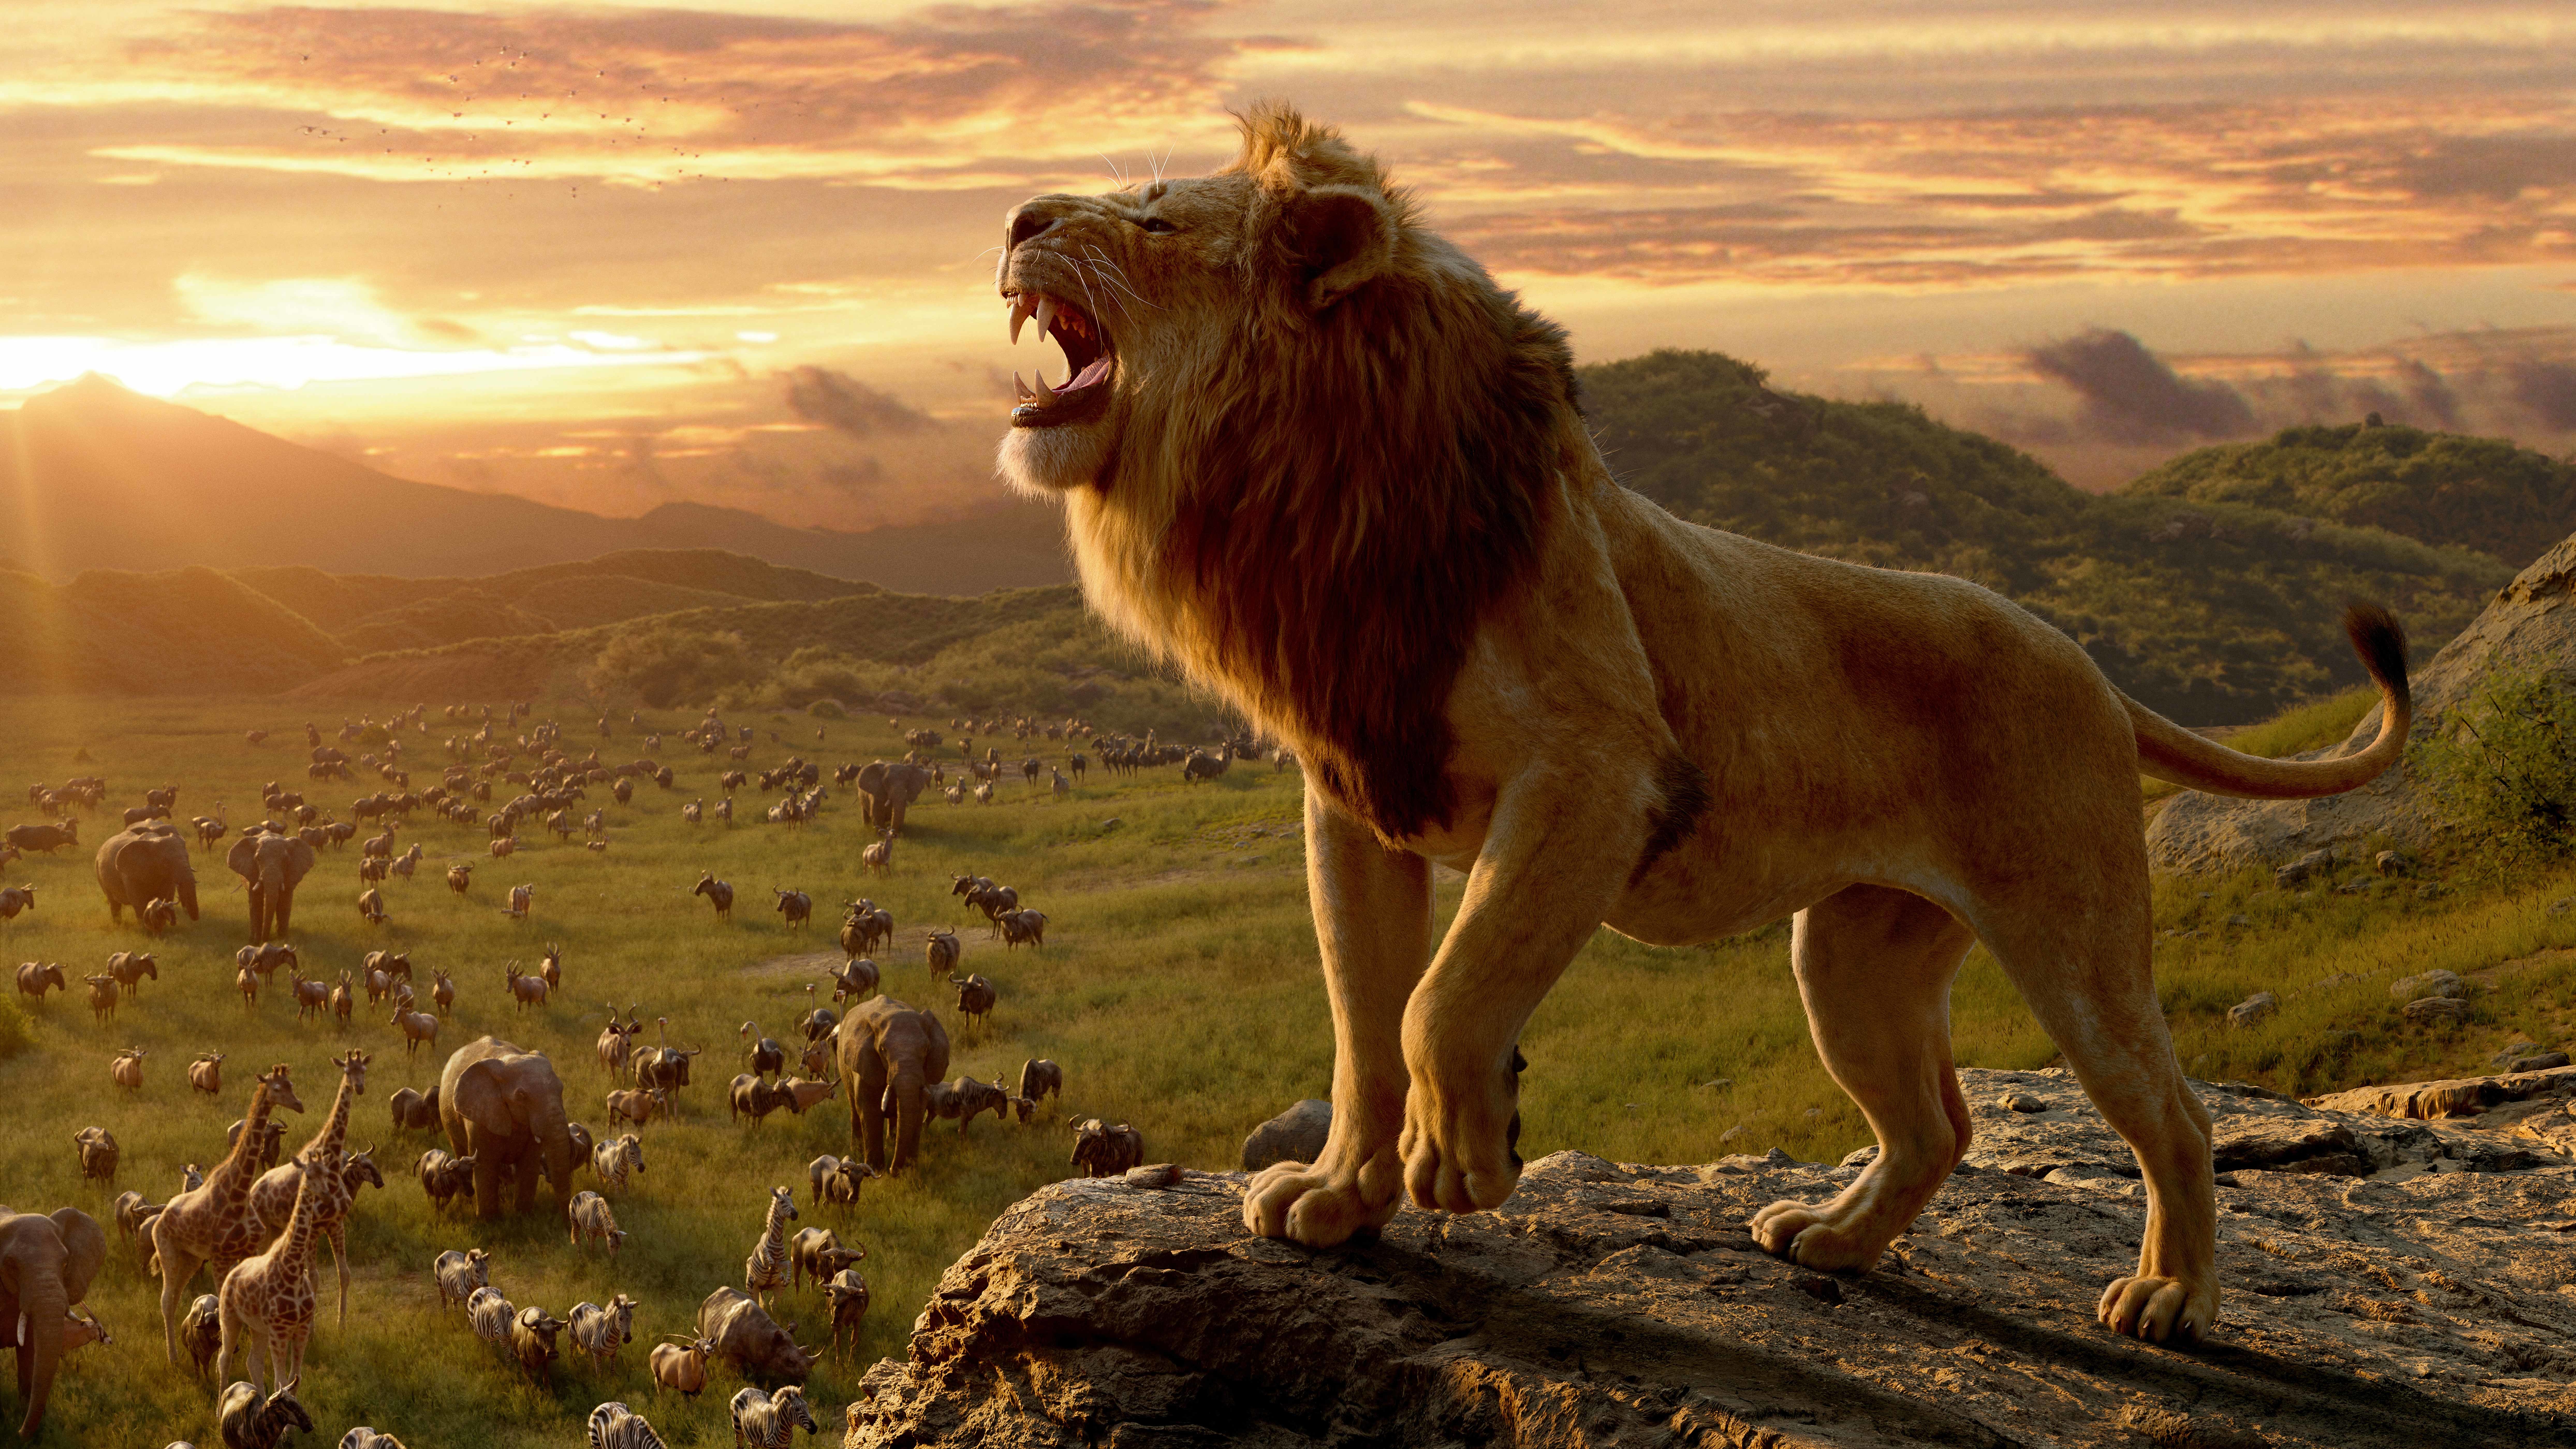 Lion From The Lion King Wallpaper, HD Movies 4K Wallpapers, Images ...